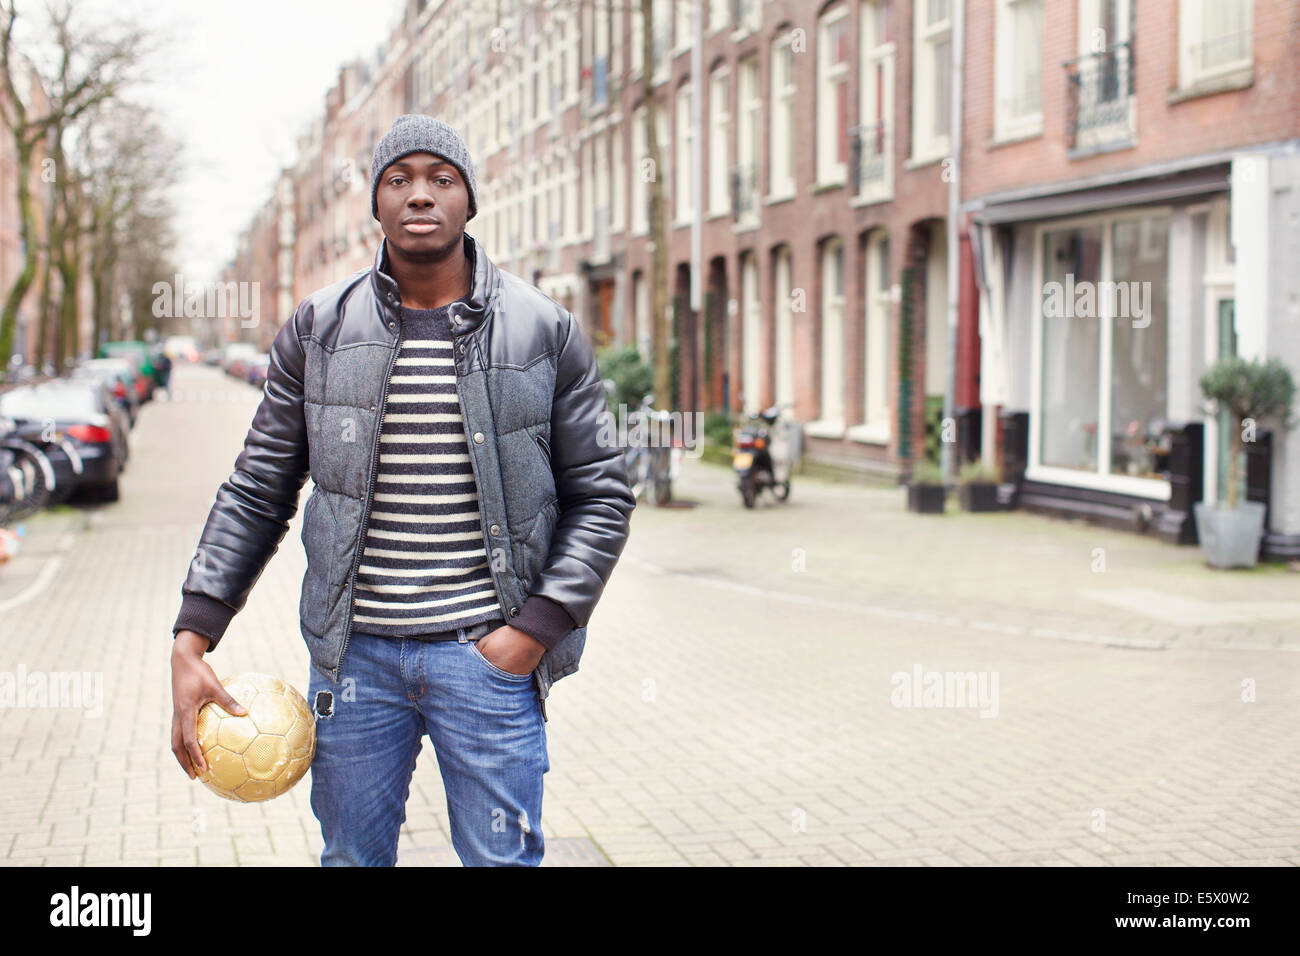 Portrait of young man on street holding soccer ball, Amsterdam, Netherlands Stock Photo